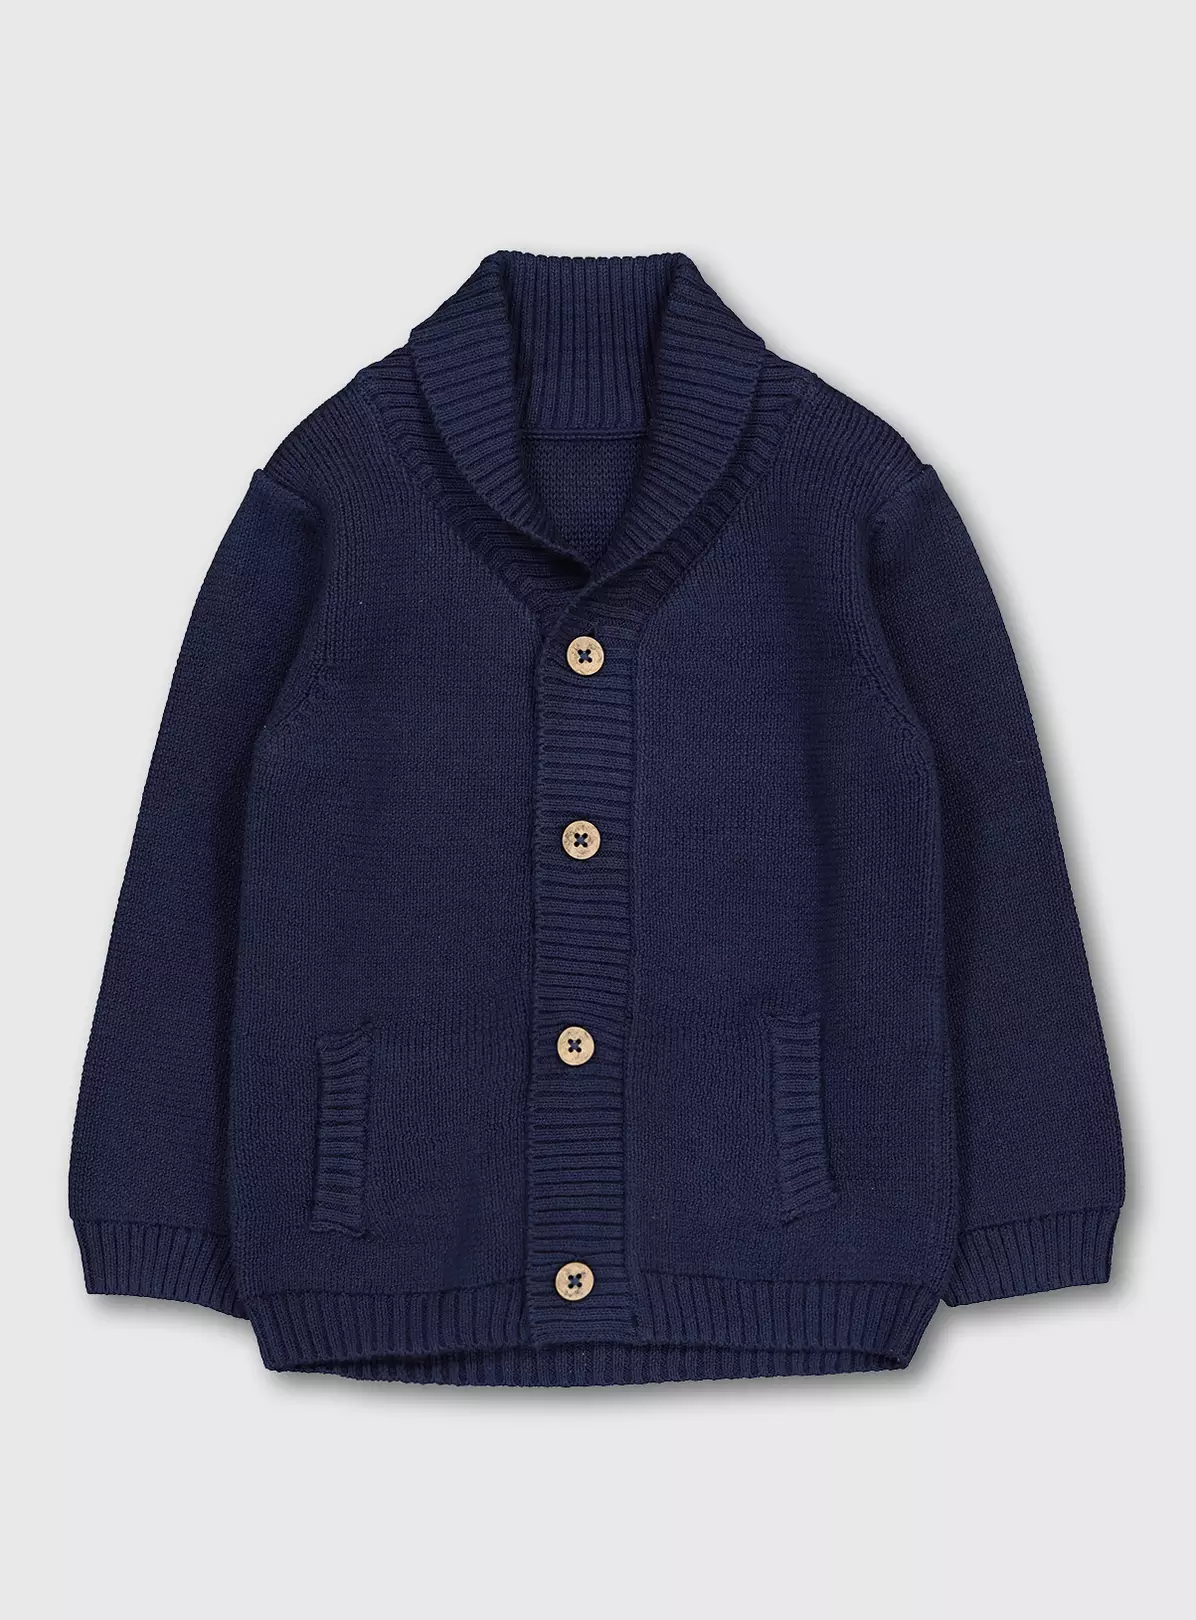 Navy Blue Knitted Shawl Collar Cardigan – 18-24 months